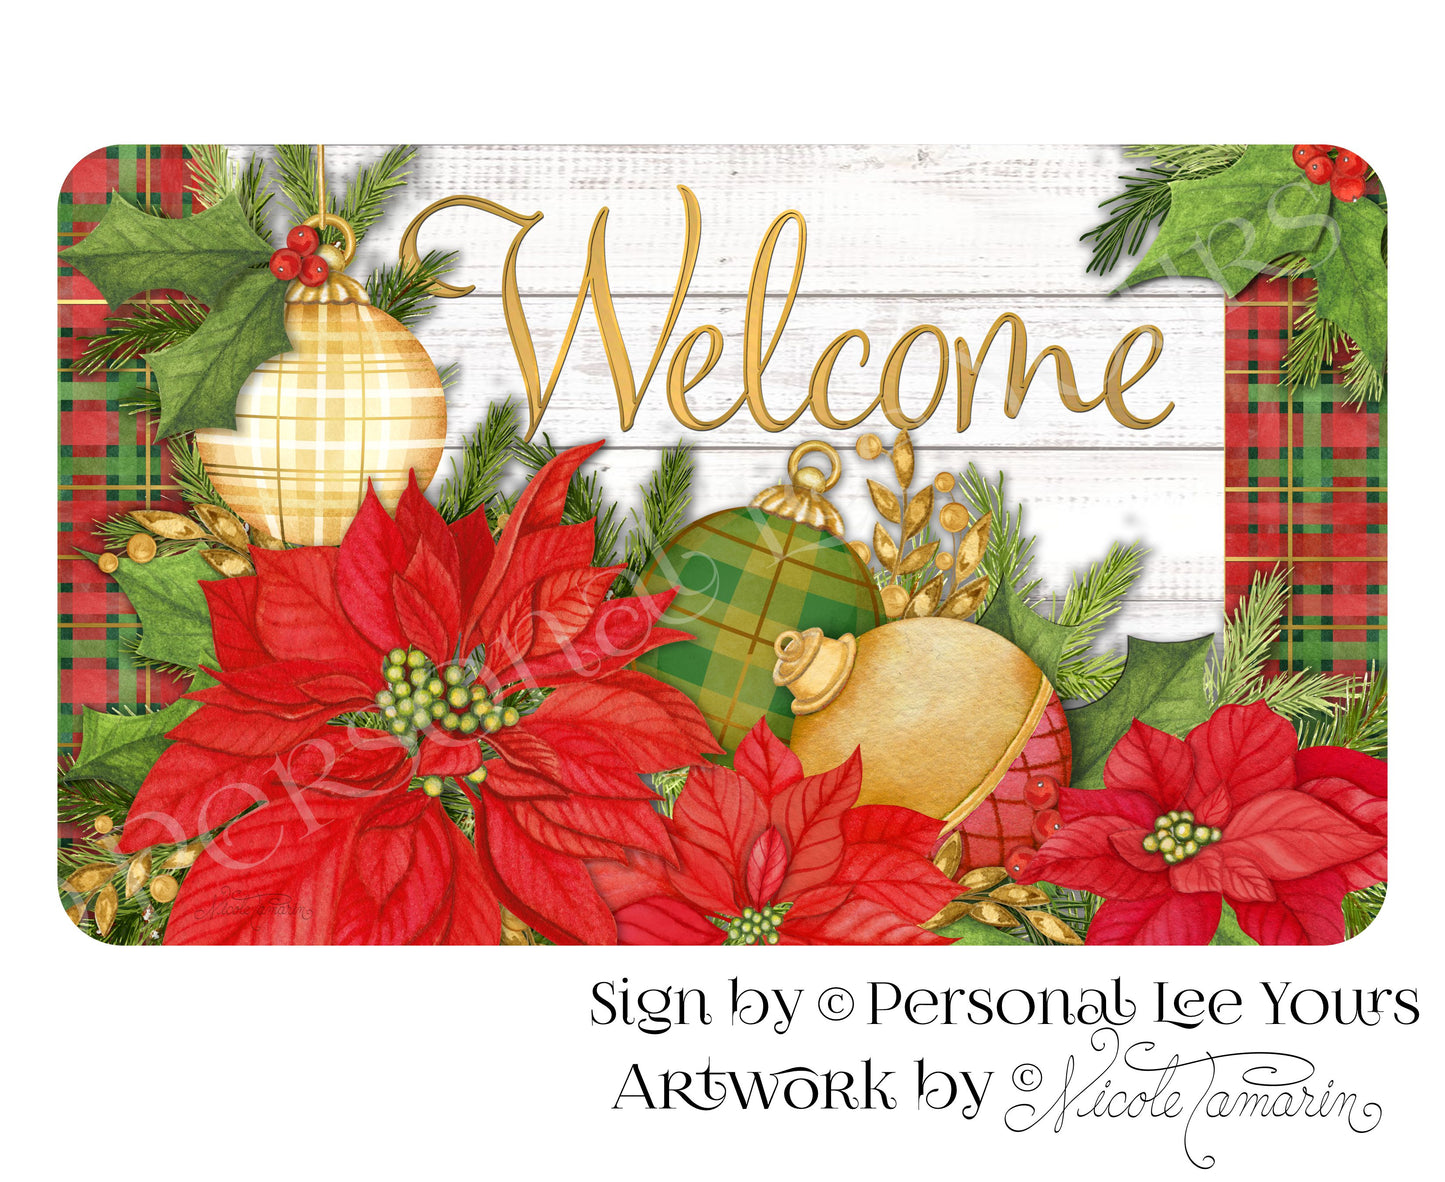 Nicole Tamarin Exclusive Sign * Plaid Christmas * Welcome * Light Background * 3 Sizes * Lightweight Metal